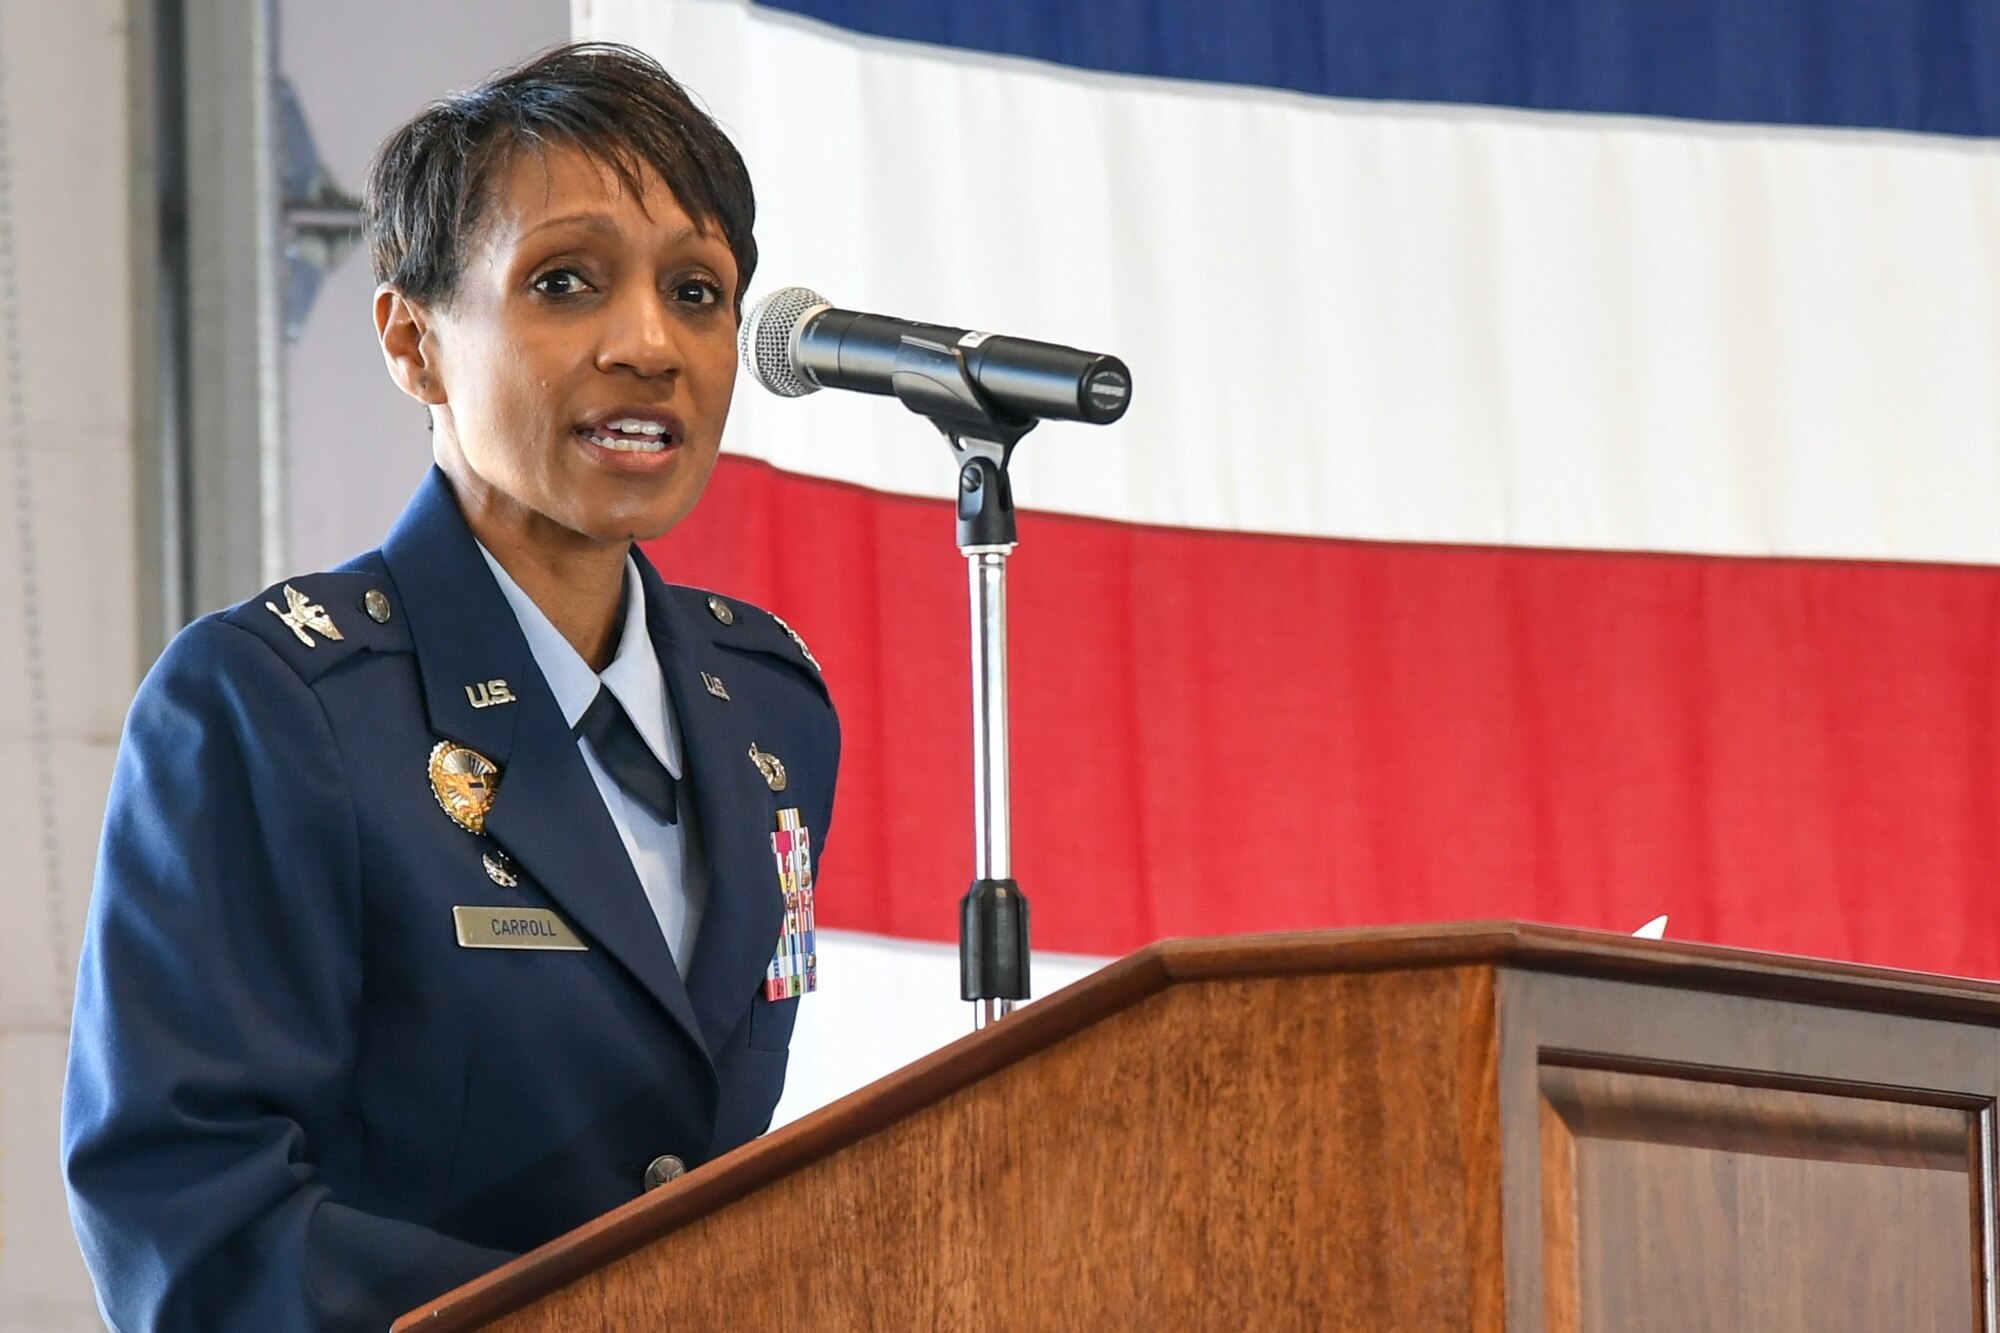 Col. Jenise M. Carroll speaks from behind a podium during her assumption of command of the 75th Air Base Wing.